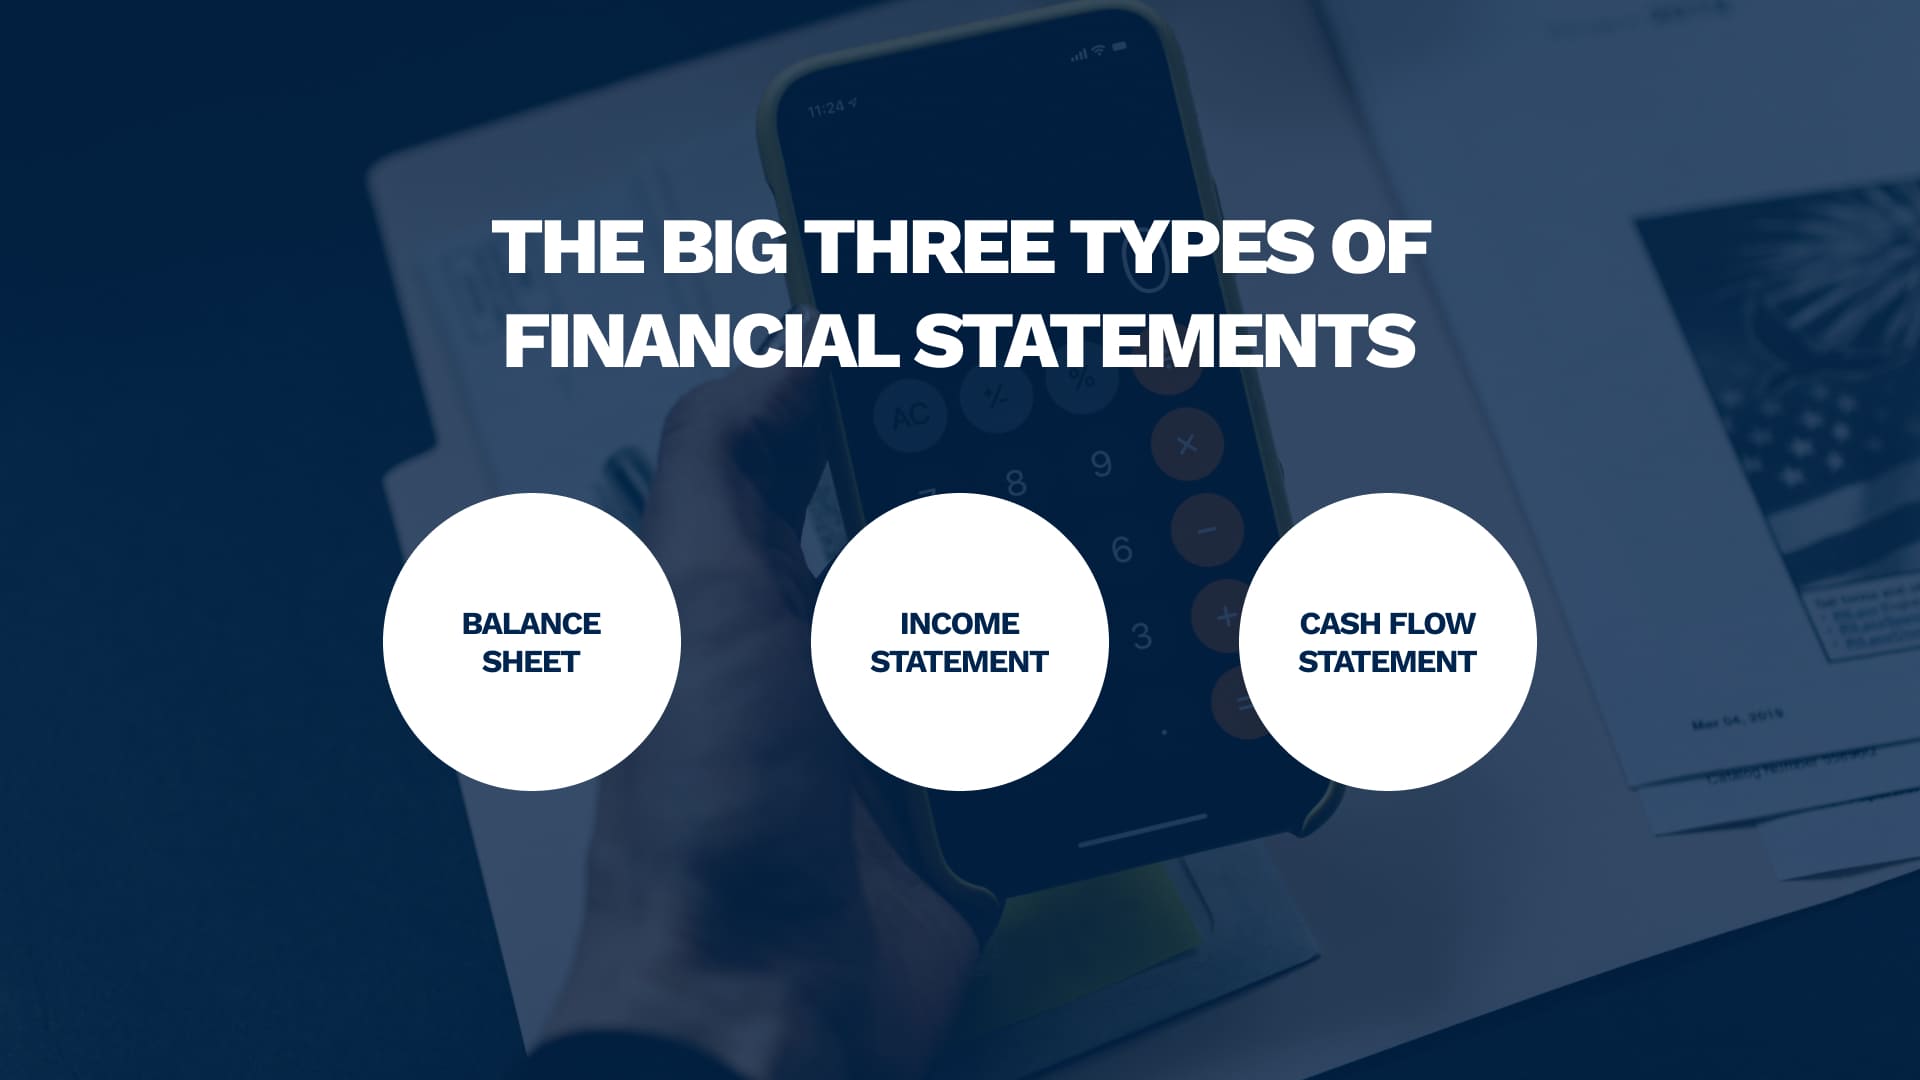 The Big Three Types of Financial Statements